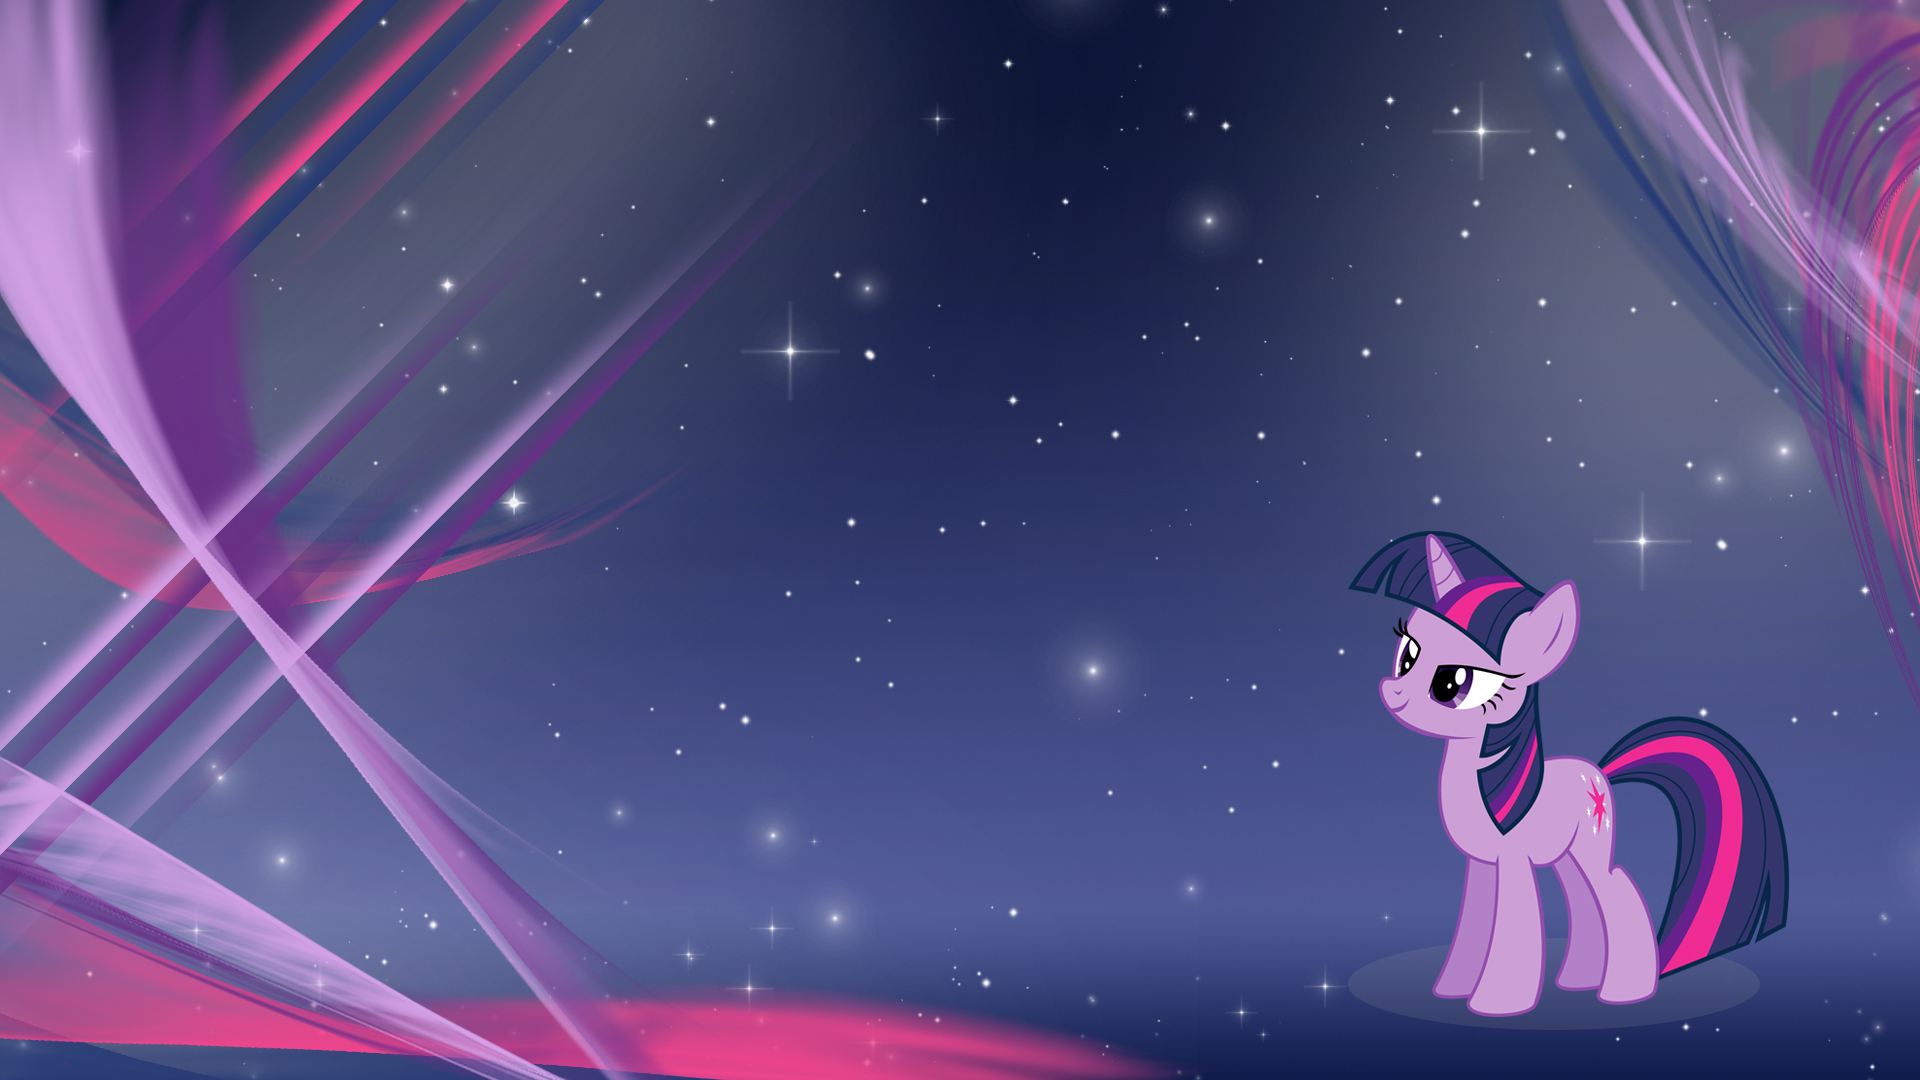 MLP: FiM - Twilight Sparkle V2 by extreme-sonic and Unfiltered-N